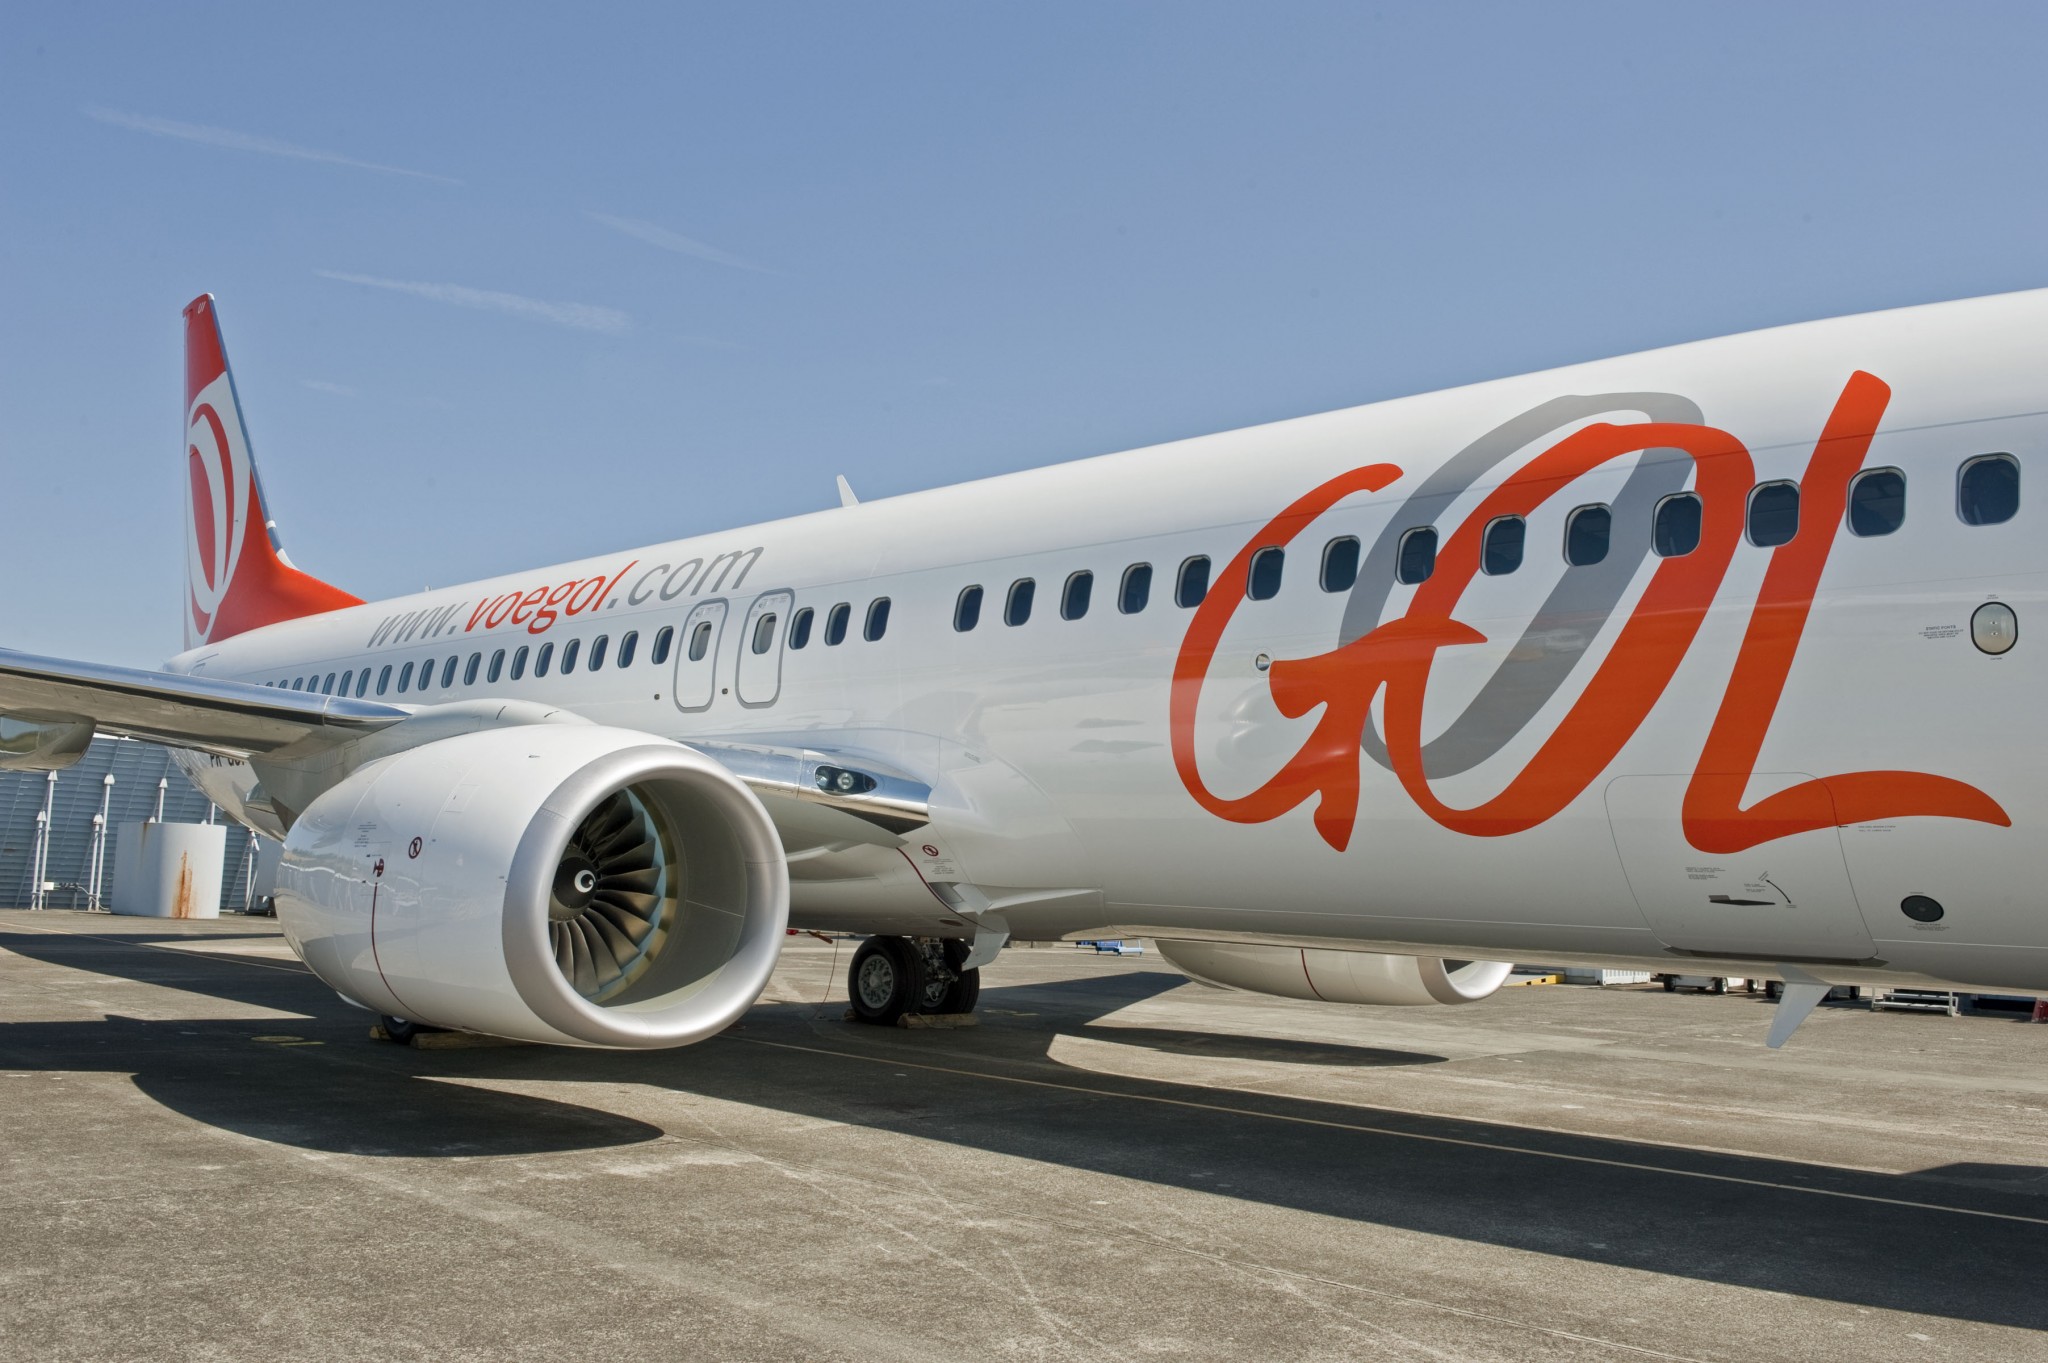 Gol releases air traffic figures for June 2019